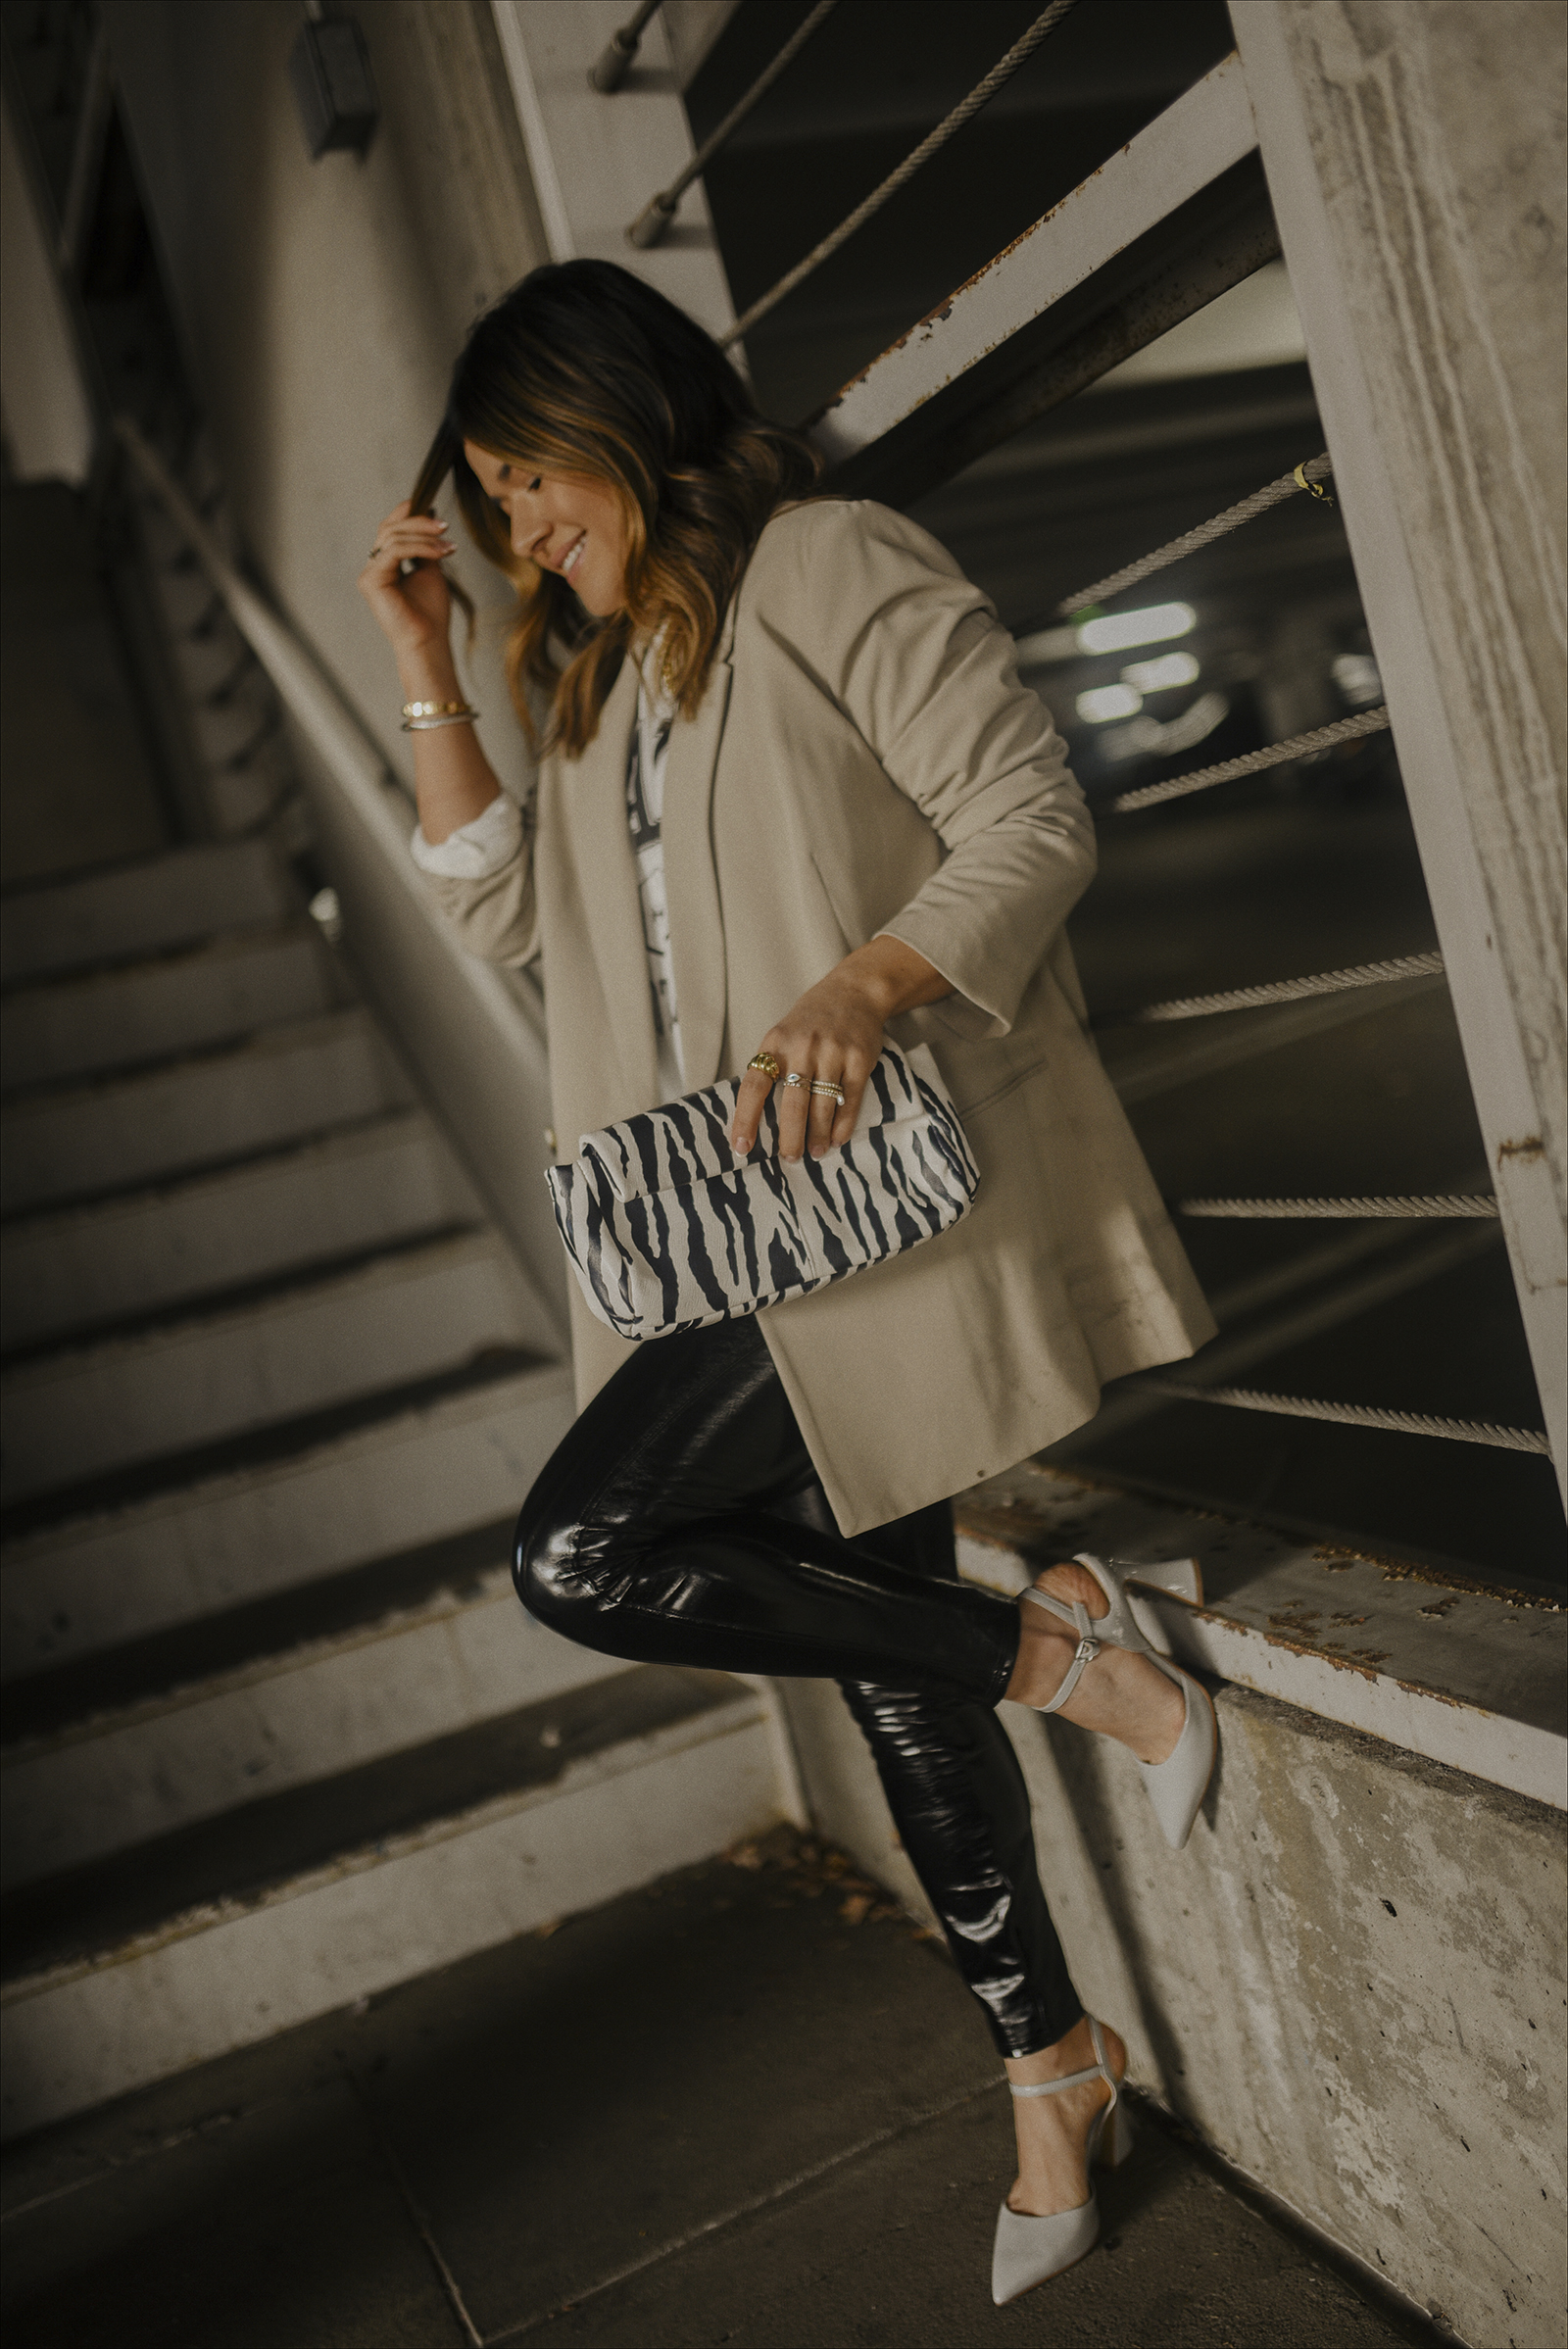 Carolina Hellal of Chic Talk wearing an H&M graphic tee and blazer, spanx liquid leggings and Vince Camuto heels and zebra print bag.